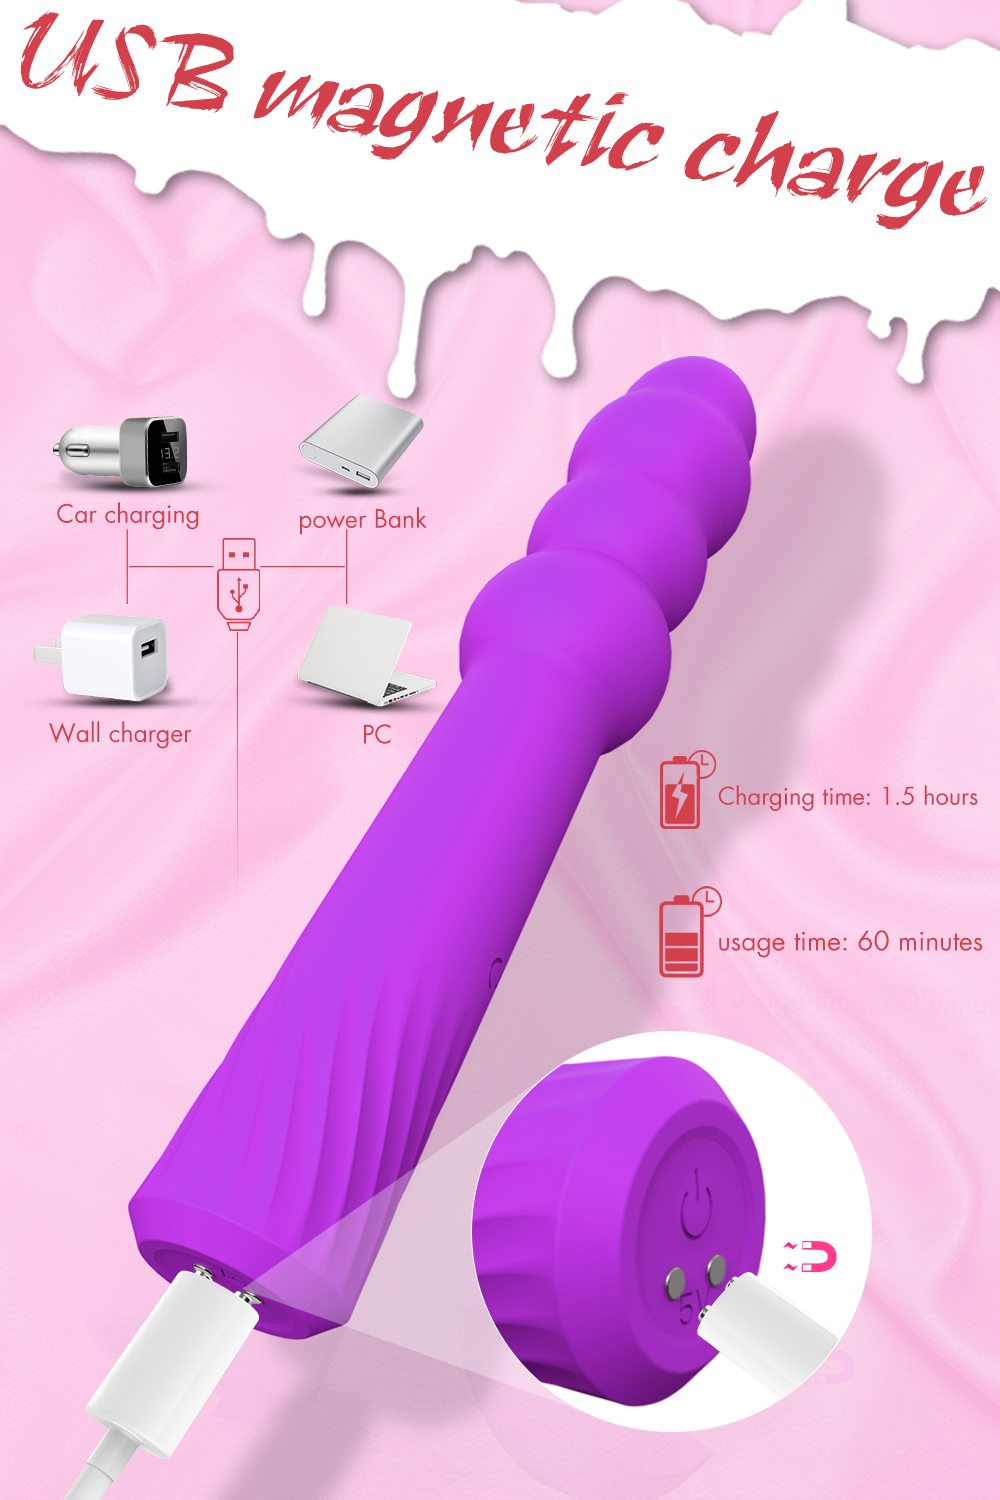 Silicone pussy womens wireless vibrator dildo pussy massager g spot vibrator violet sex toys for woman【S346】